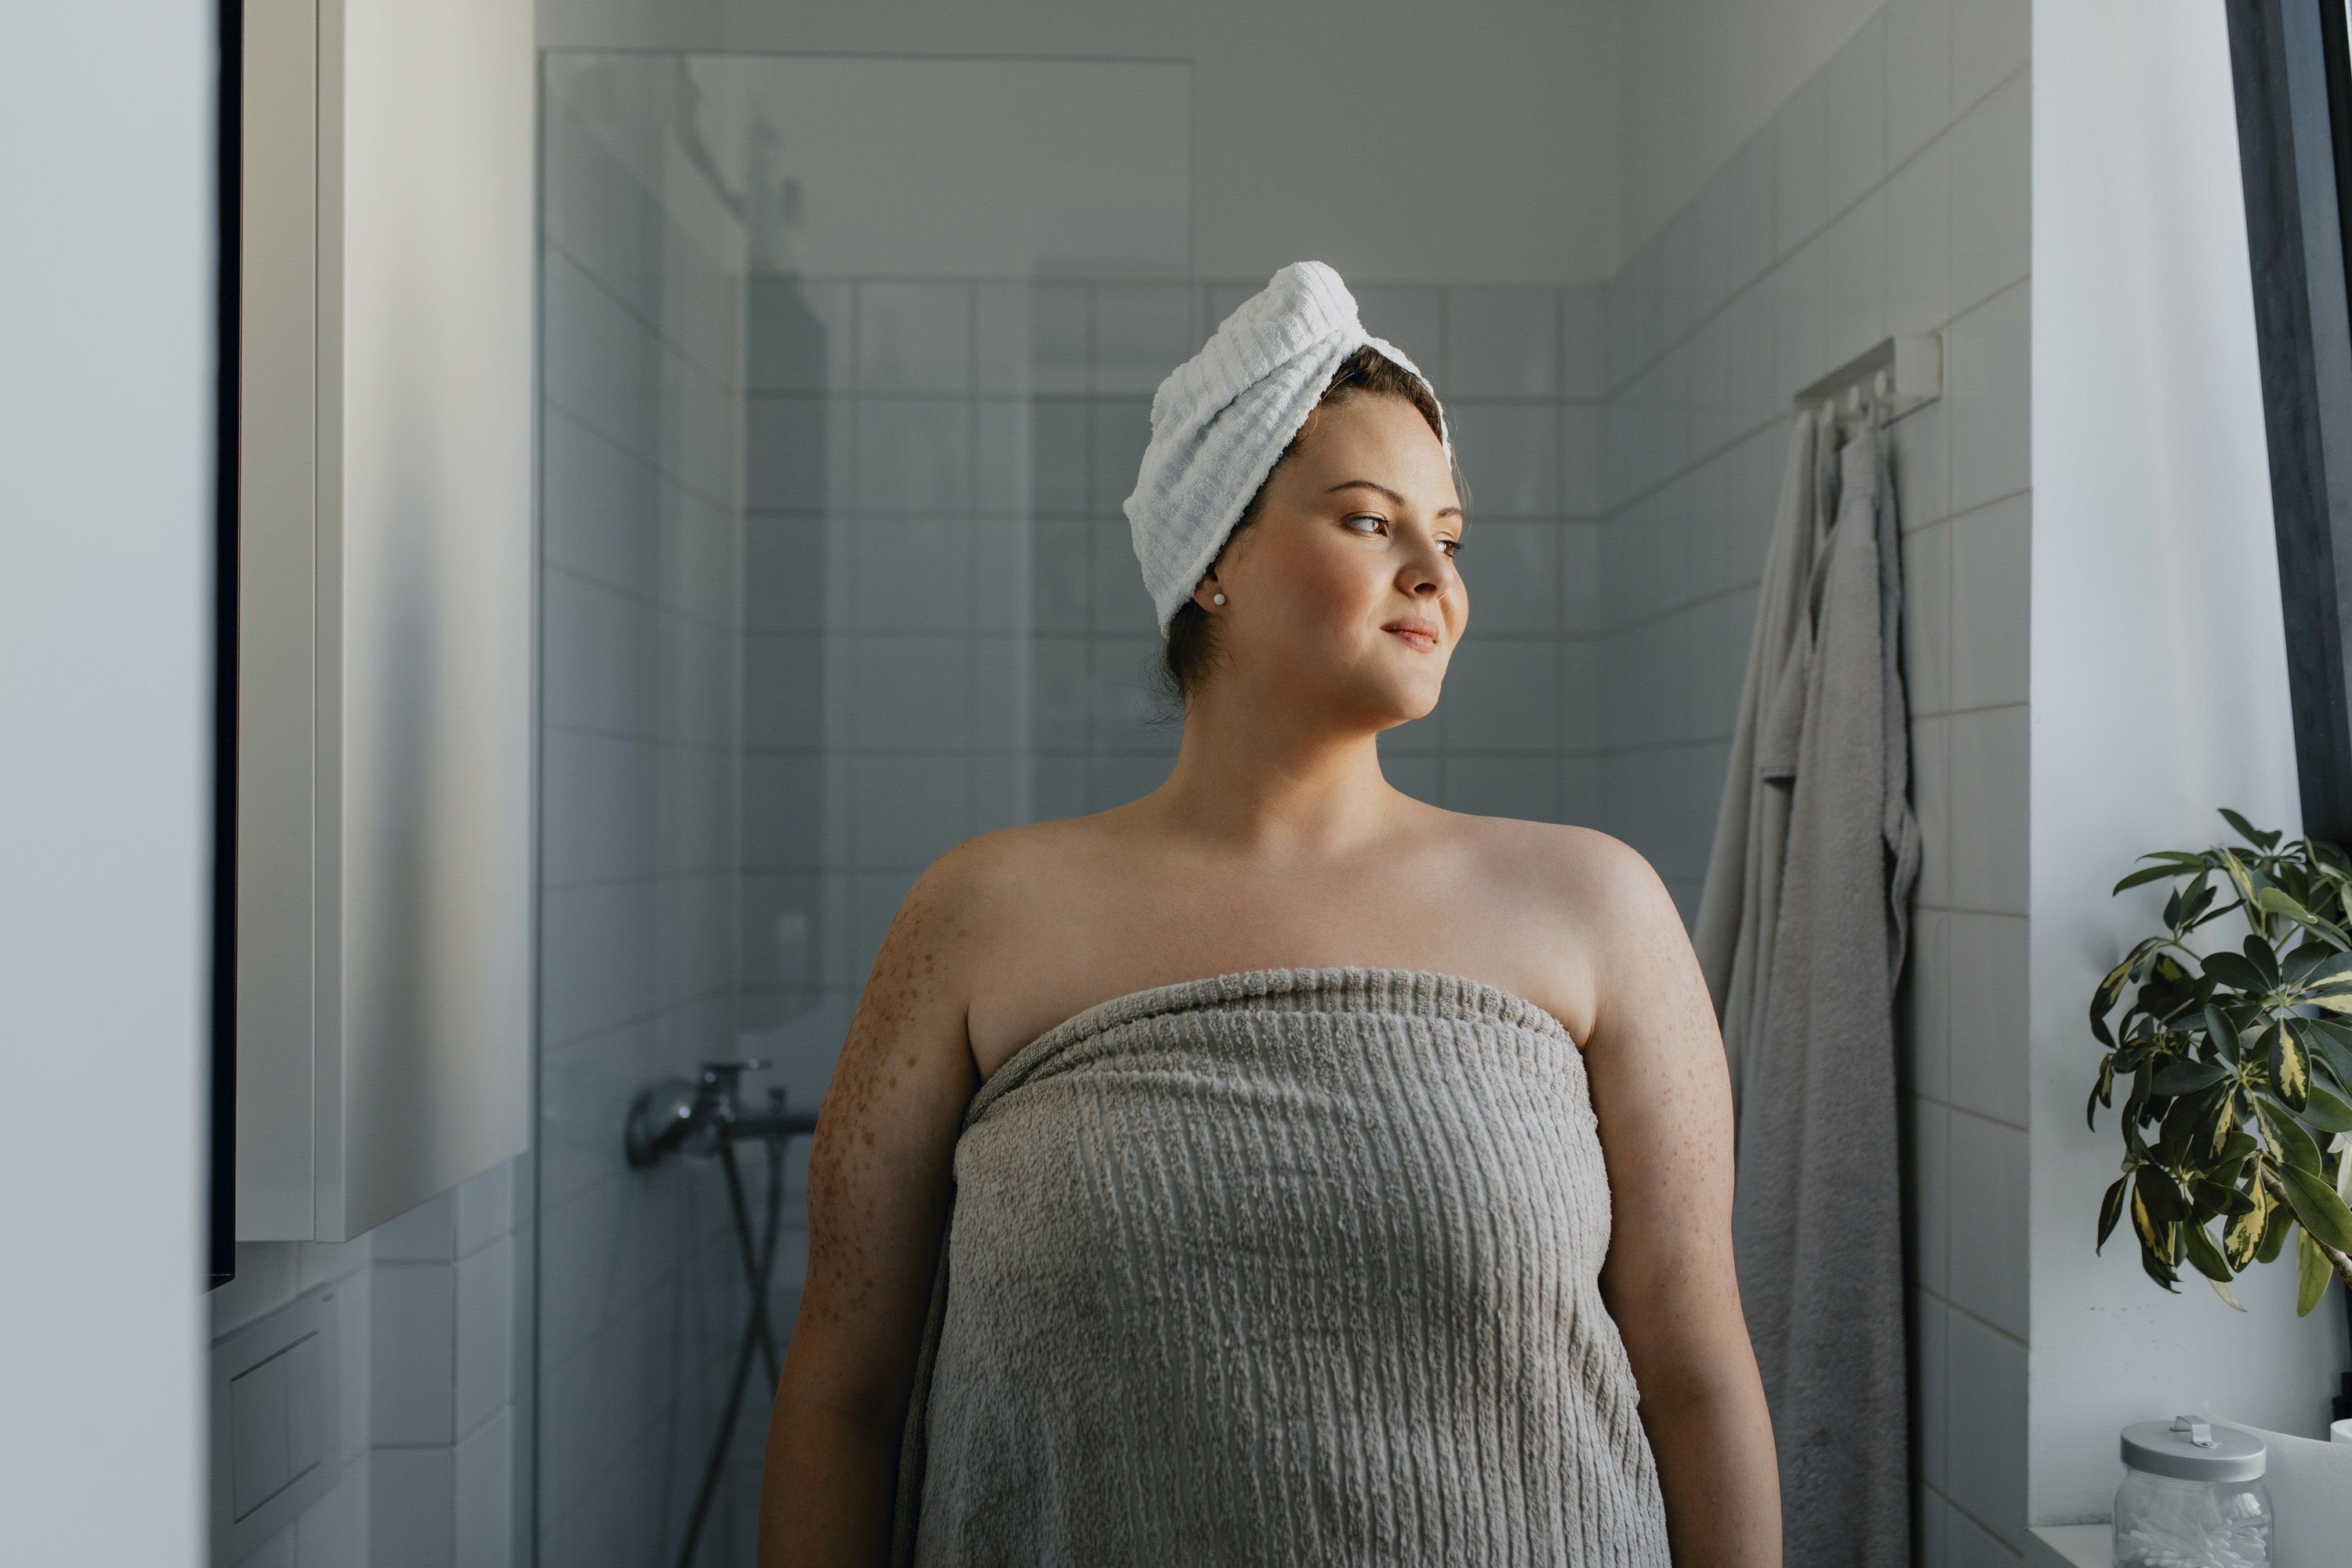 A woman in a towel after a shower